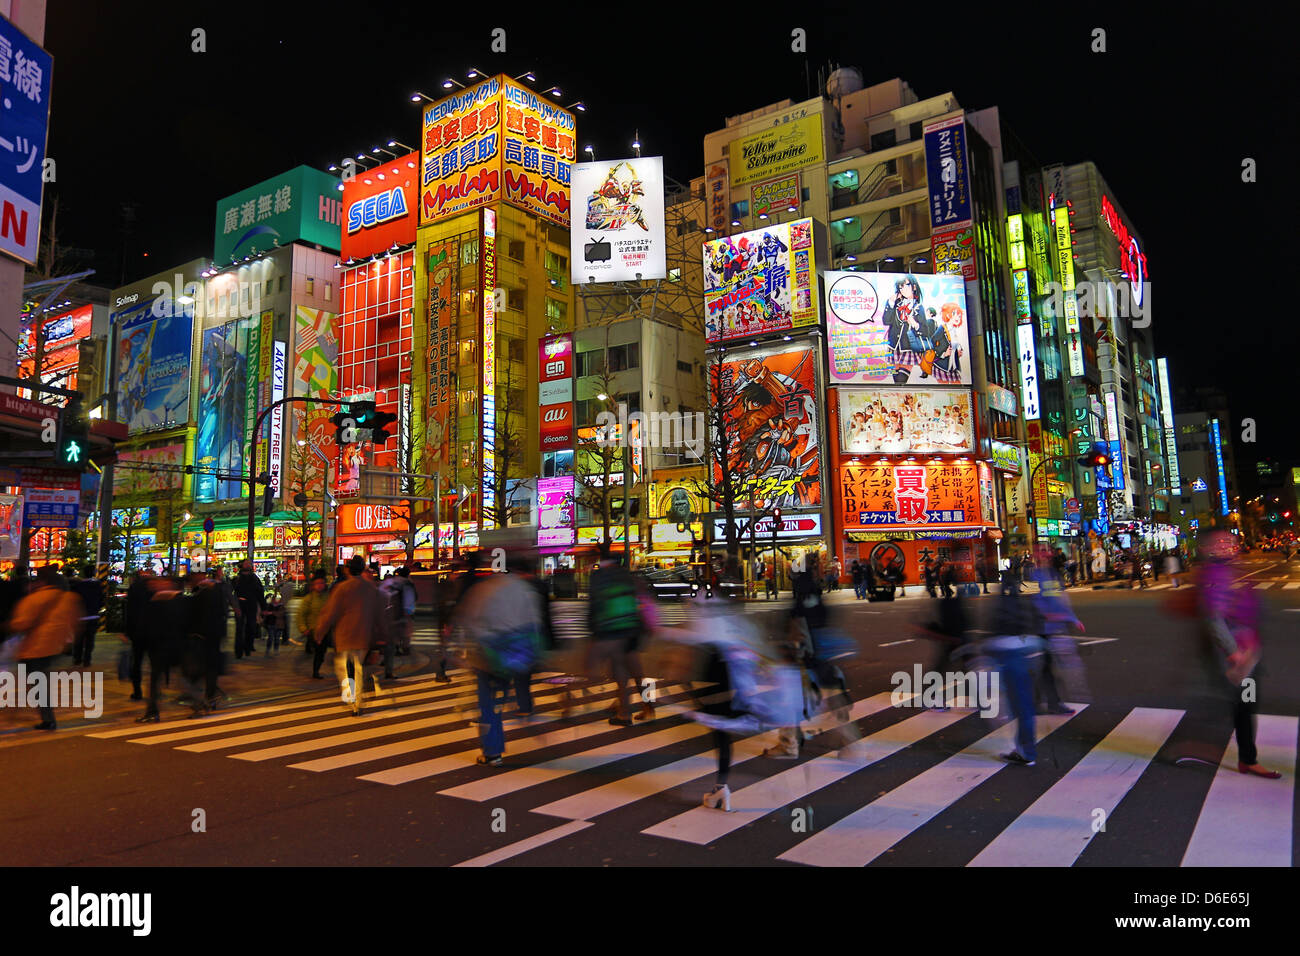 Lights of shops and buildings of Akihabara Electric Town street scene with a pedestrian crossing in Tokyo, Japan Stock Photo